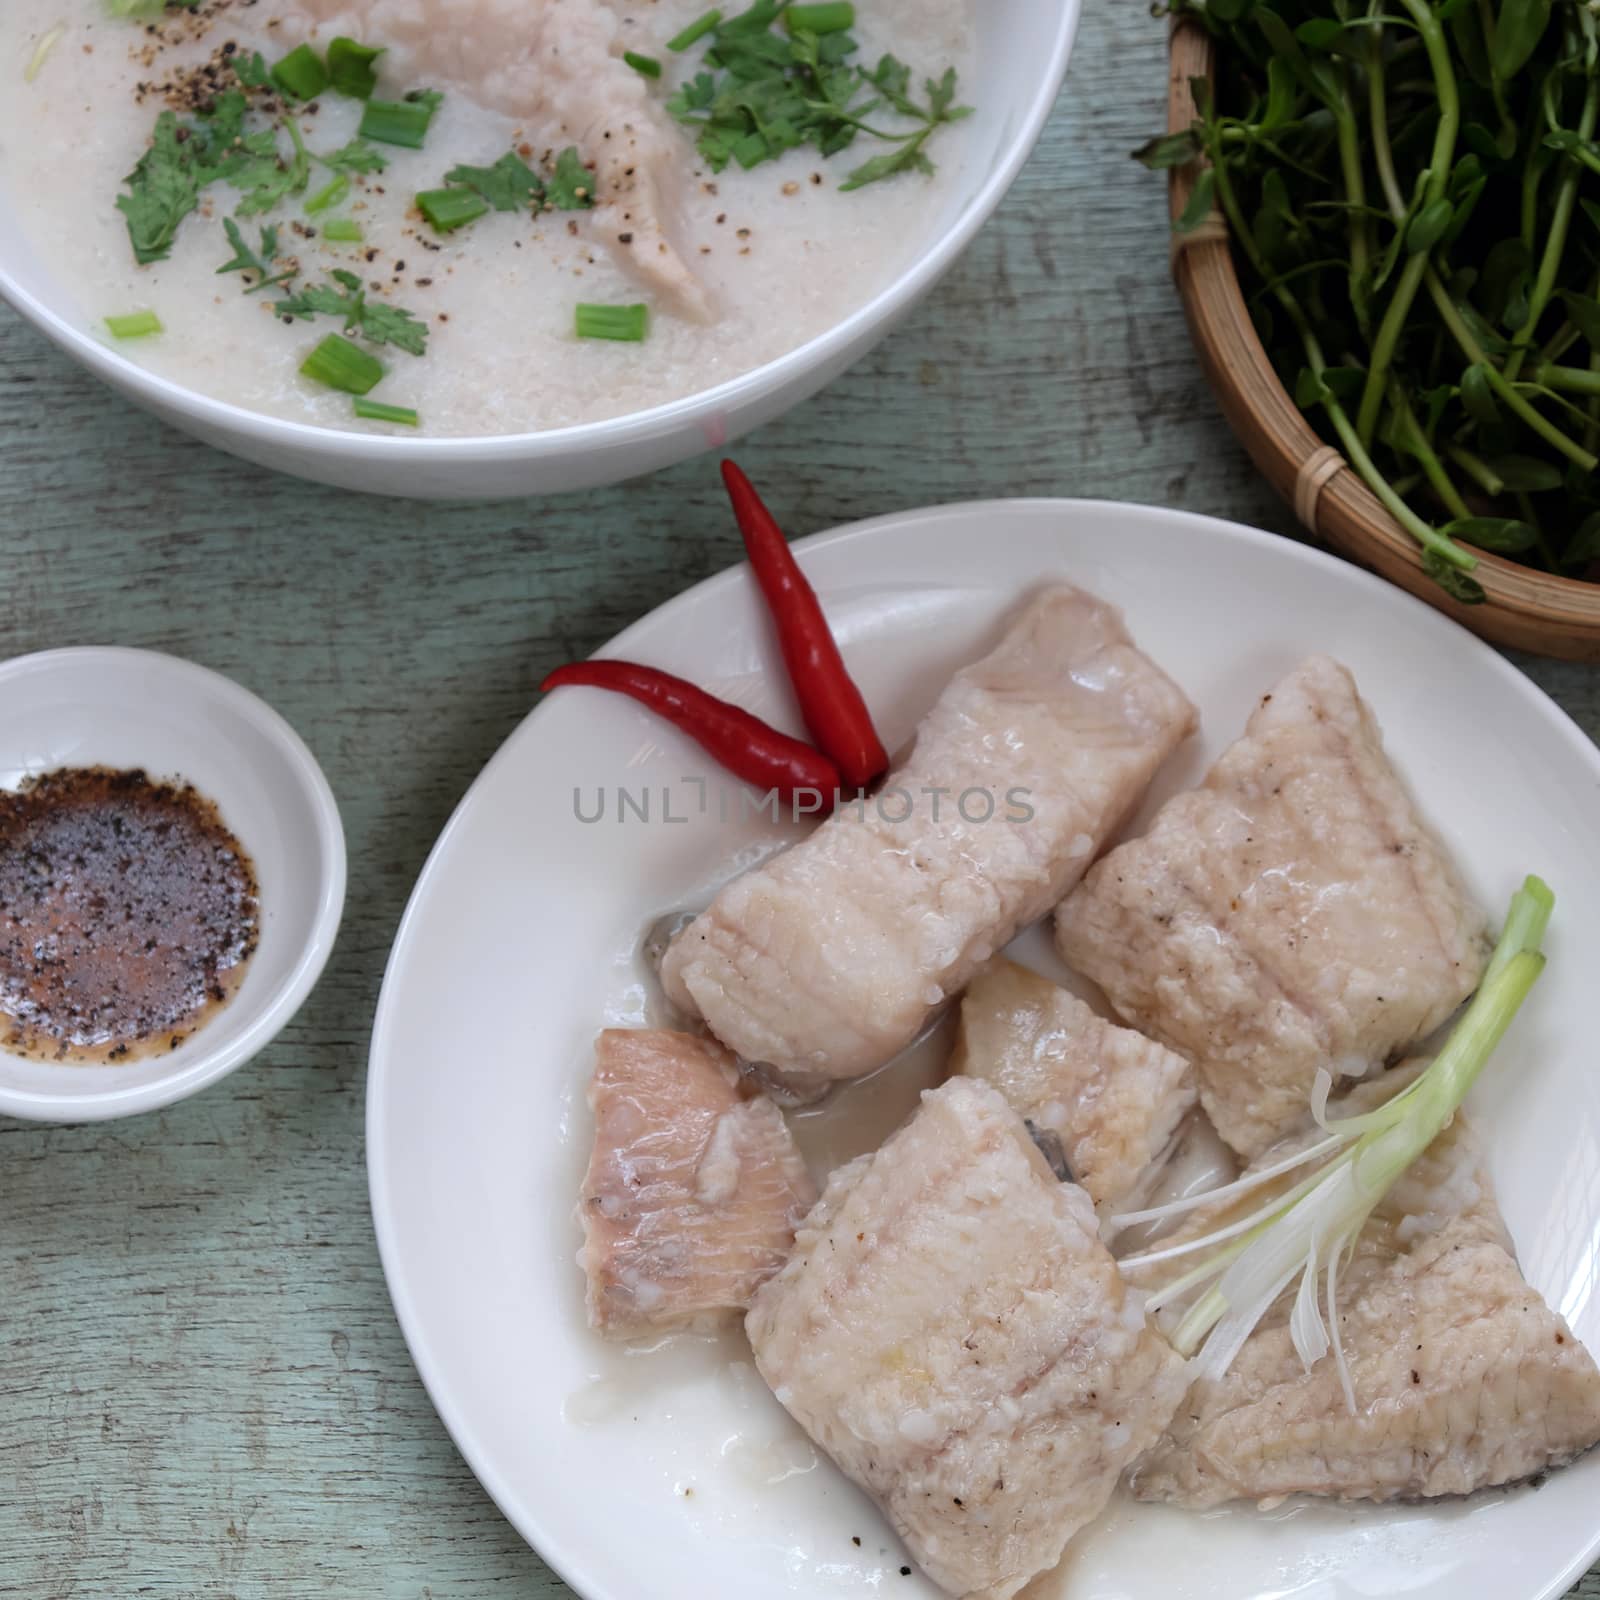 Vietnamese food, fish soup by xuanhuongho